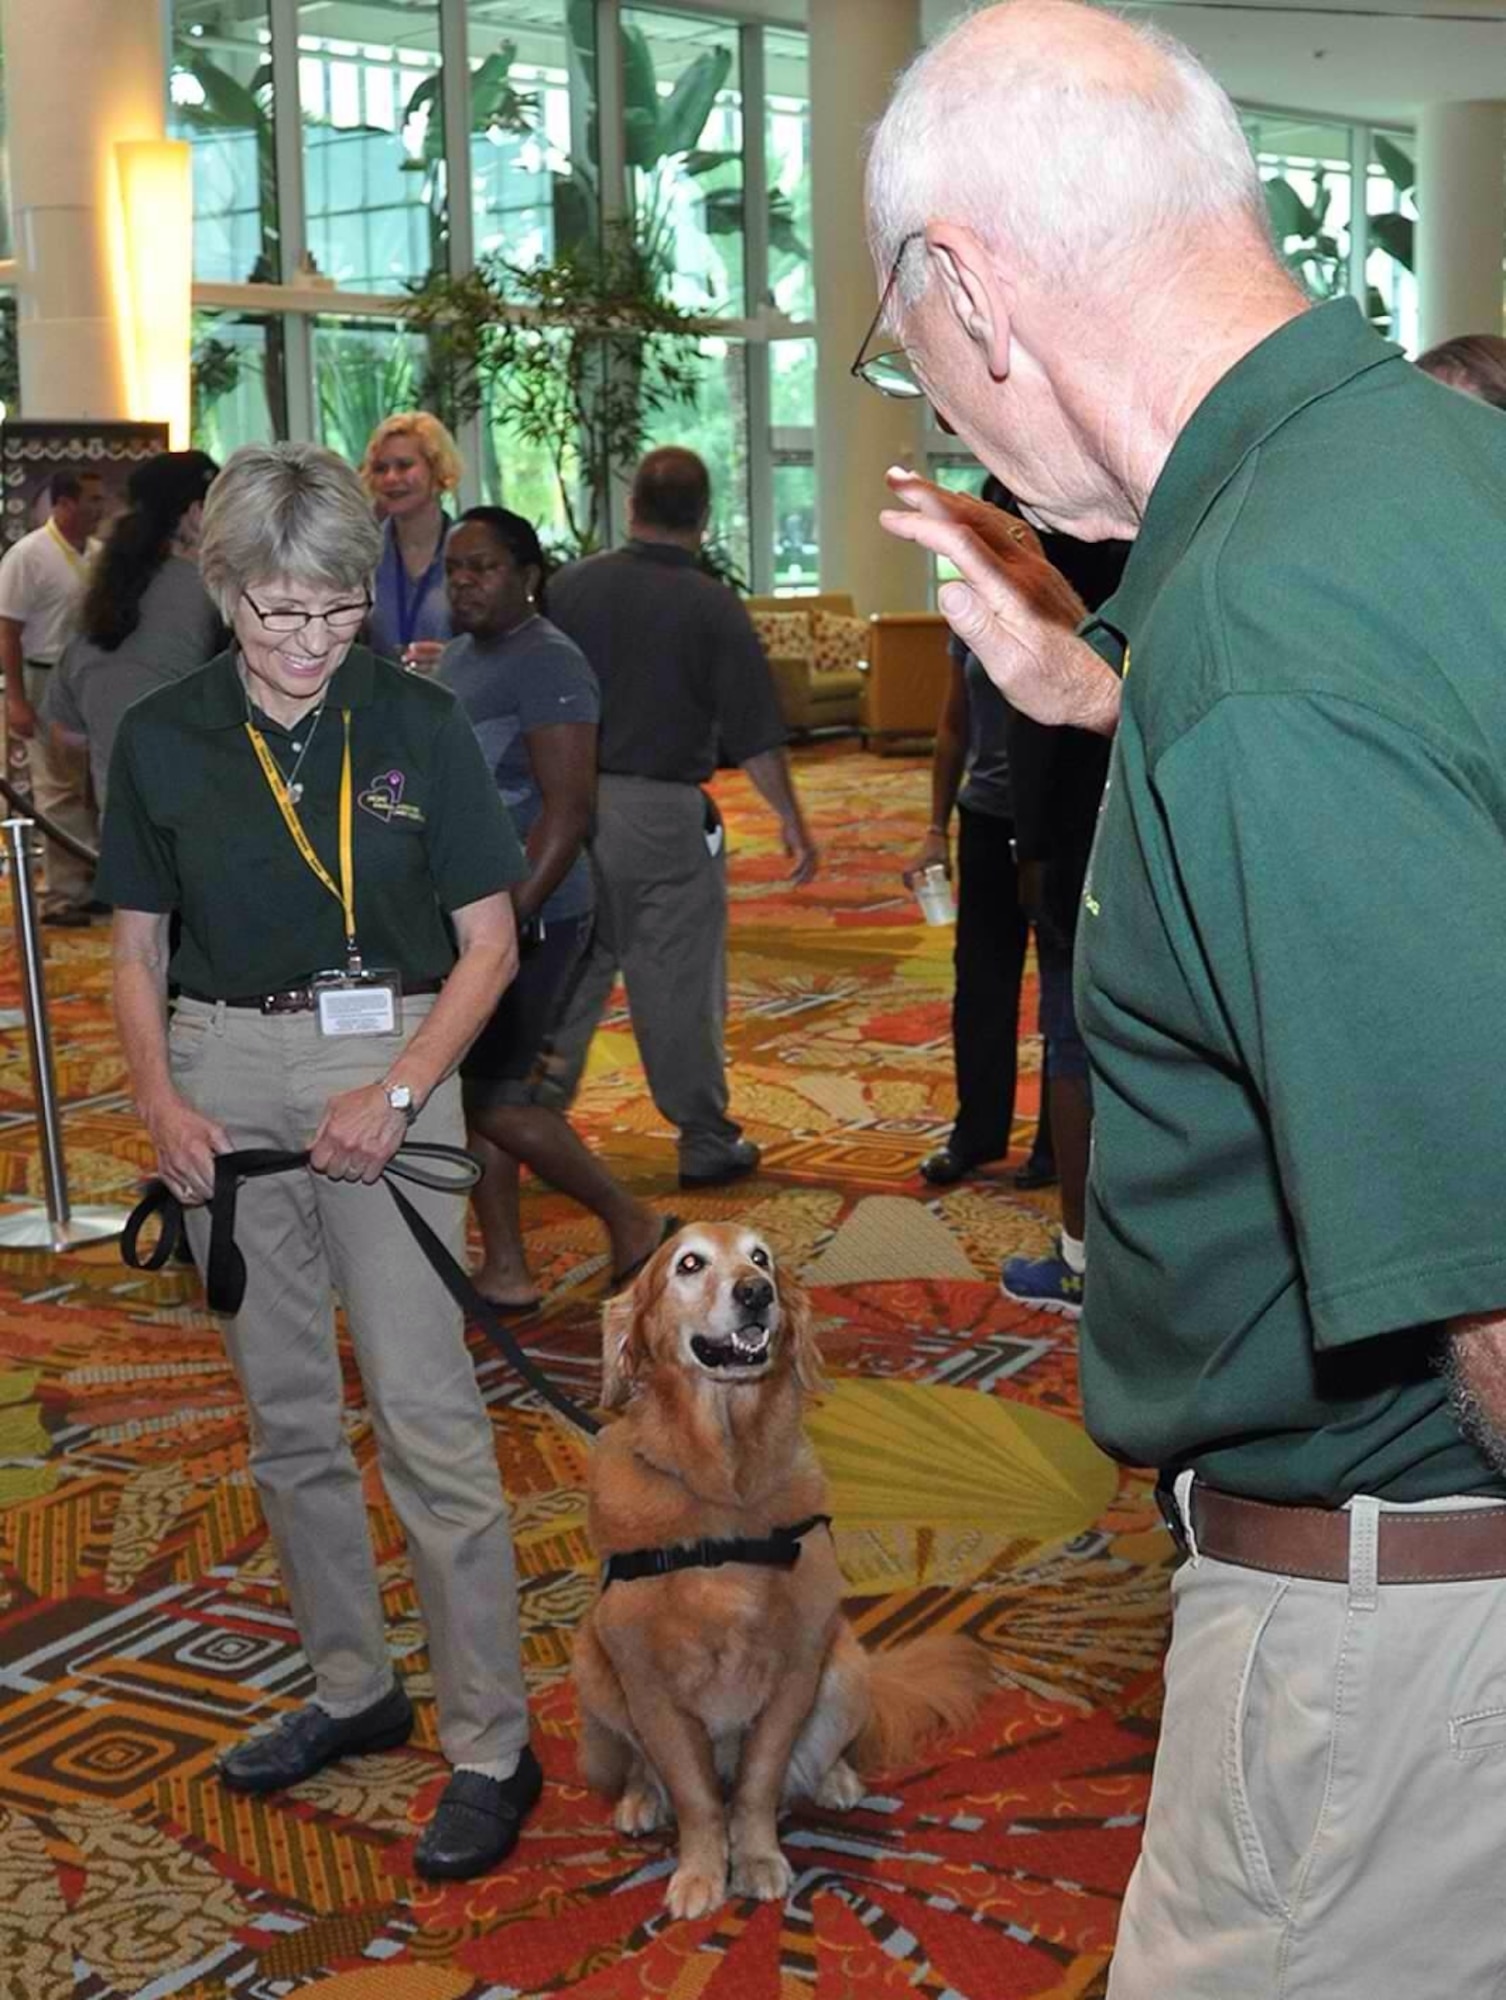 HOPE Animal-Assisted Crisis Response representatives Kathy and Jerry Constantino work with service dog Tess July 25, 2014, during an Air Force Reserve Yellow Ribbon training weekend in Orlando, Florida. The program promotes the well-being of reservists and their loved ones by connecting them with resources before and after deployments. (U.S. Air Force photo by Master Sgt. James Branch)